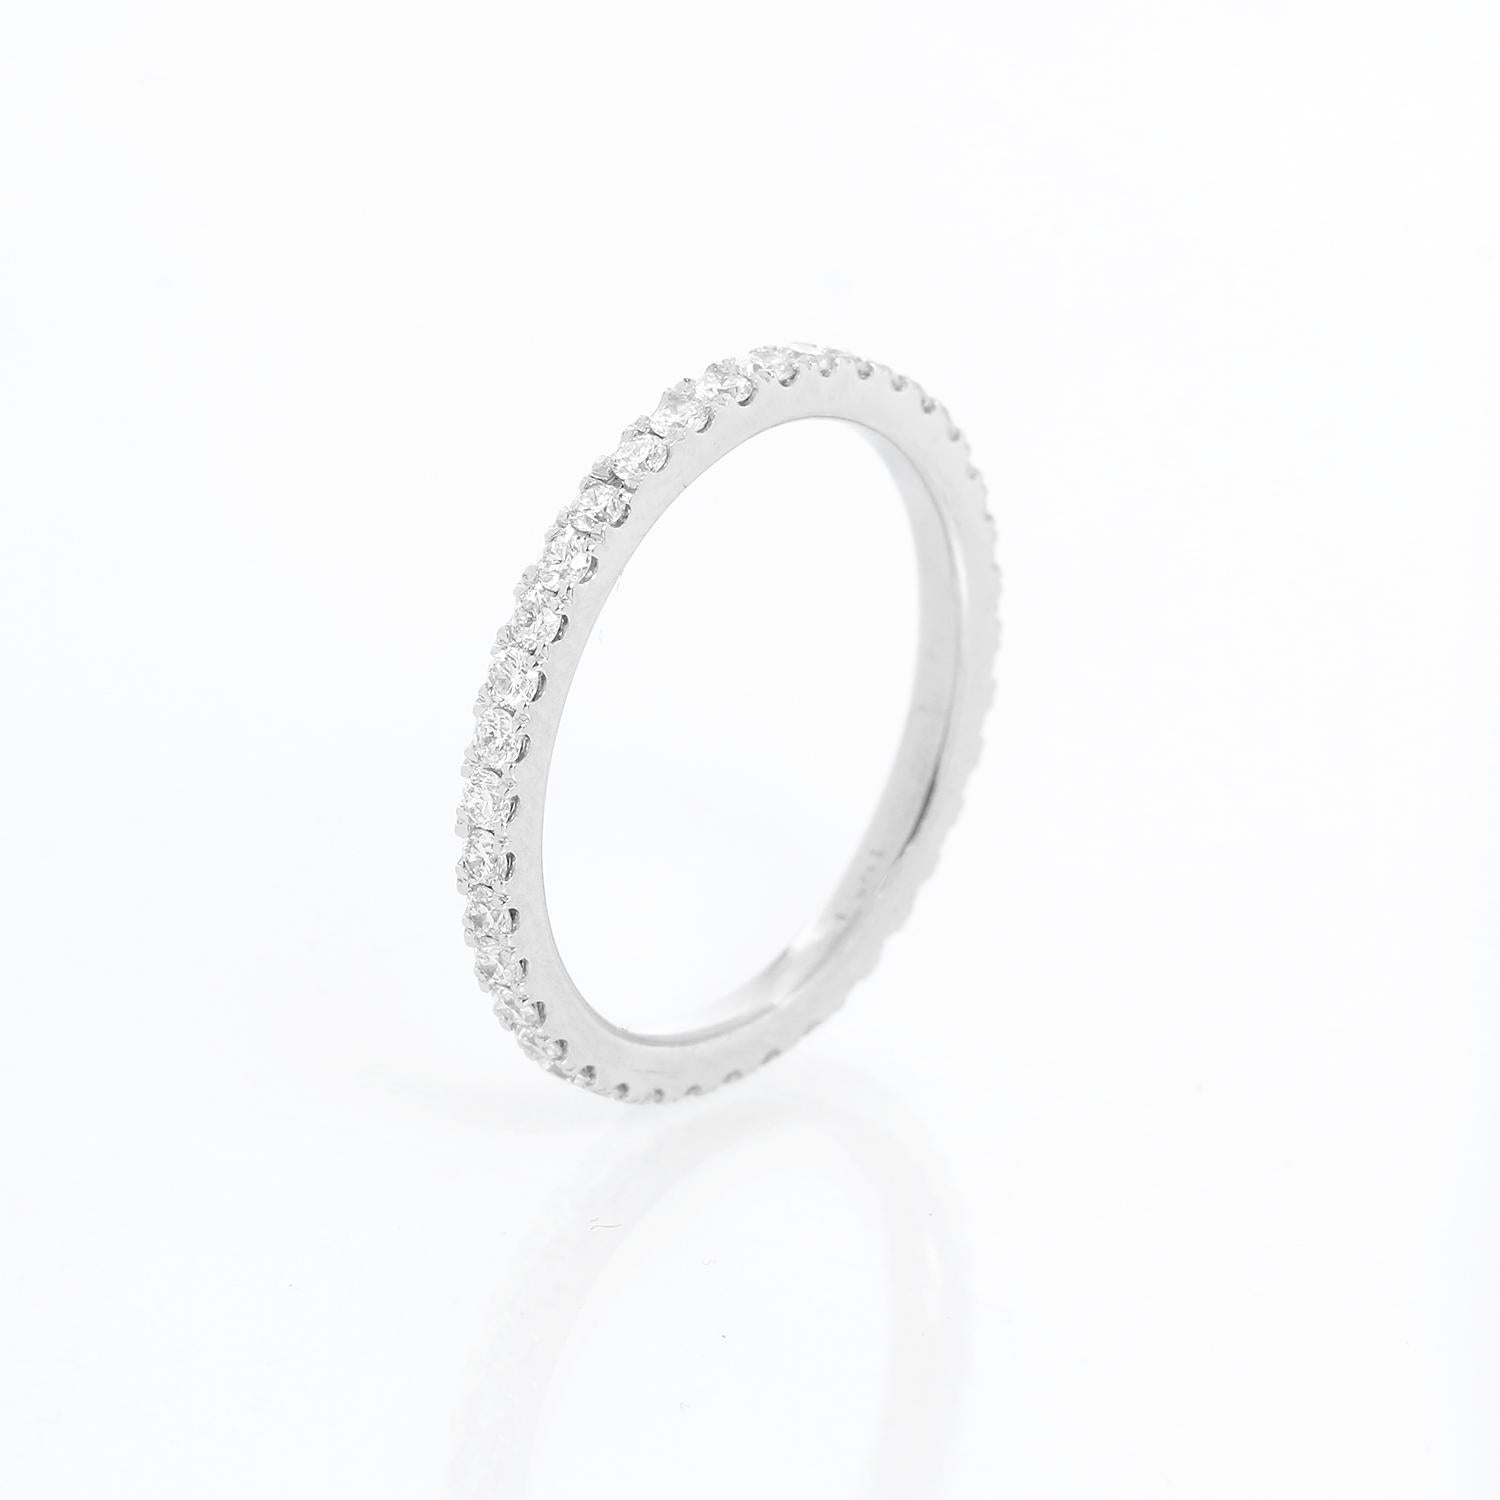 Women's 18k White Gold Pave Diamond Band Approx 1 Carat For Sale